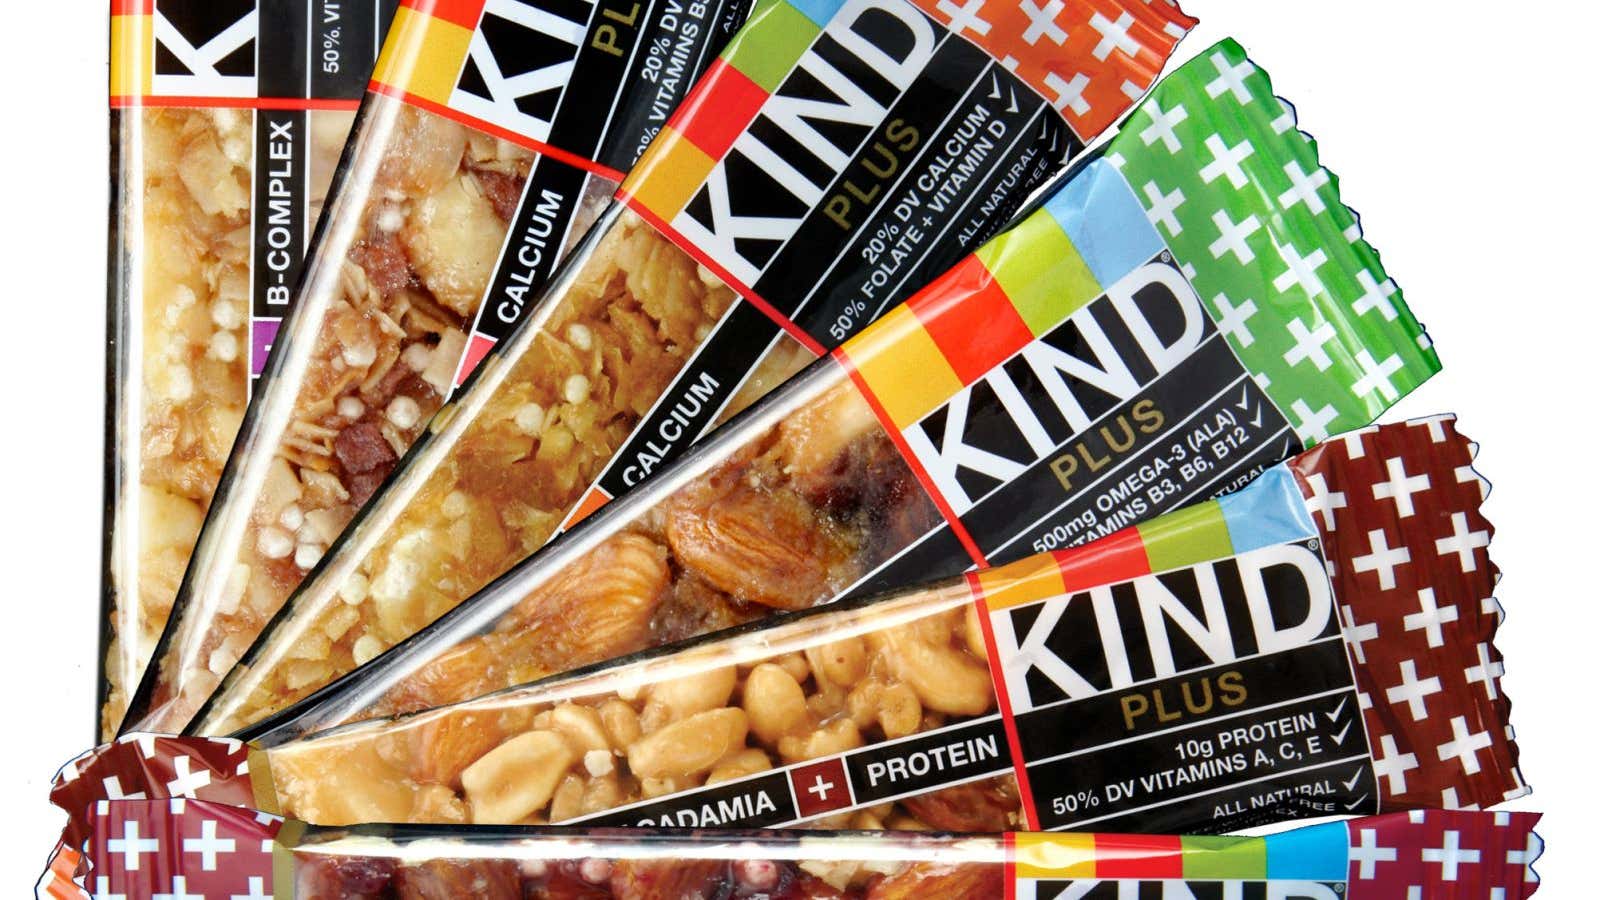 FDA says these bars aren’t healthy. How nutty.